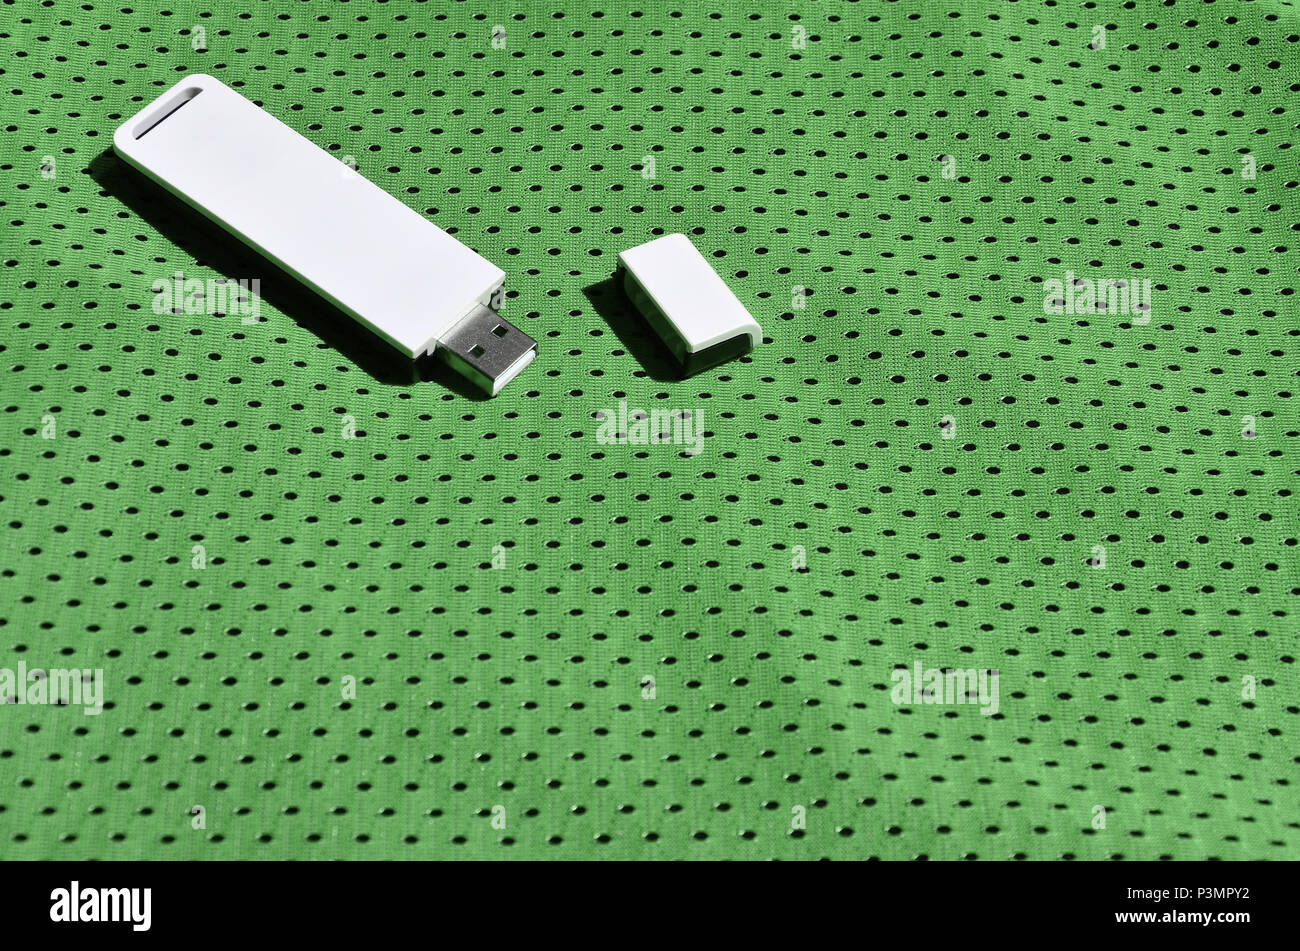 A modern portable USB wi-fi adapter is placed on the green sportswear made of polyester nylon fiber Stock Photo